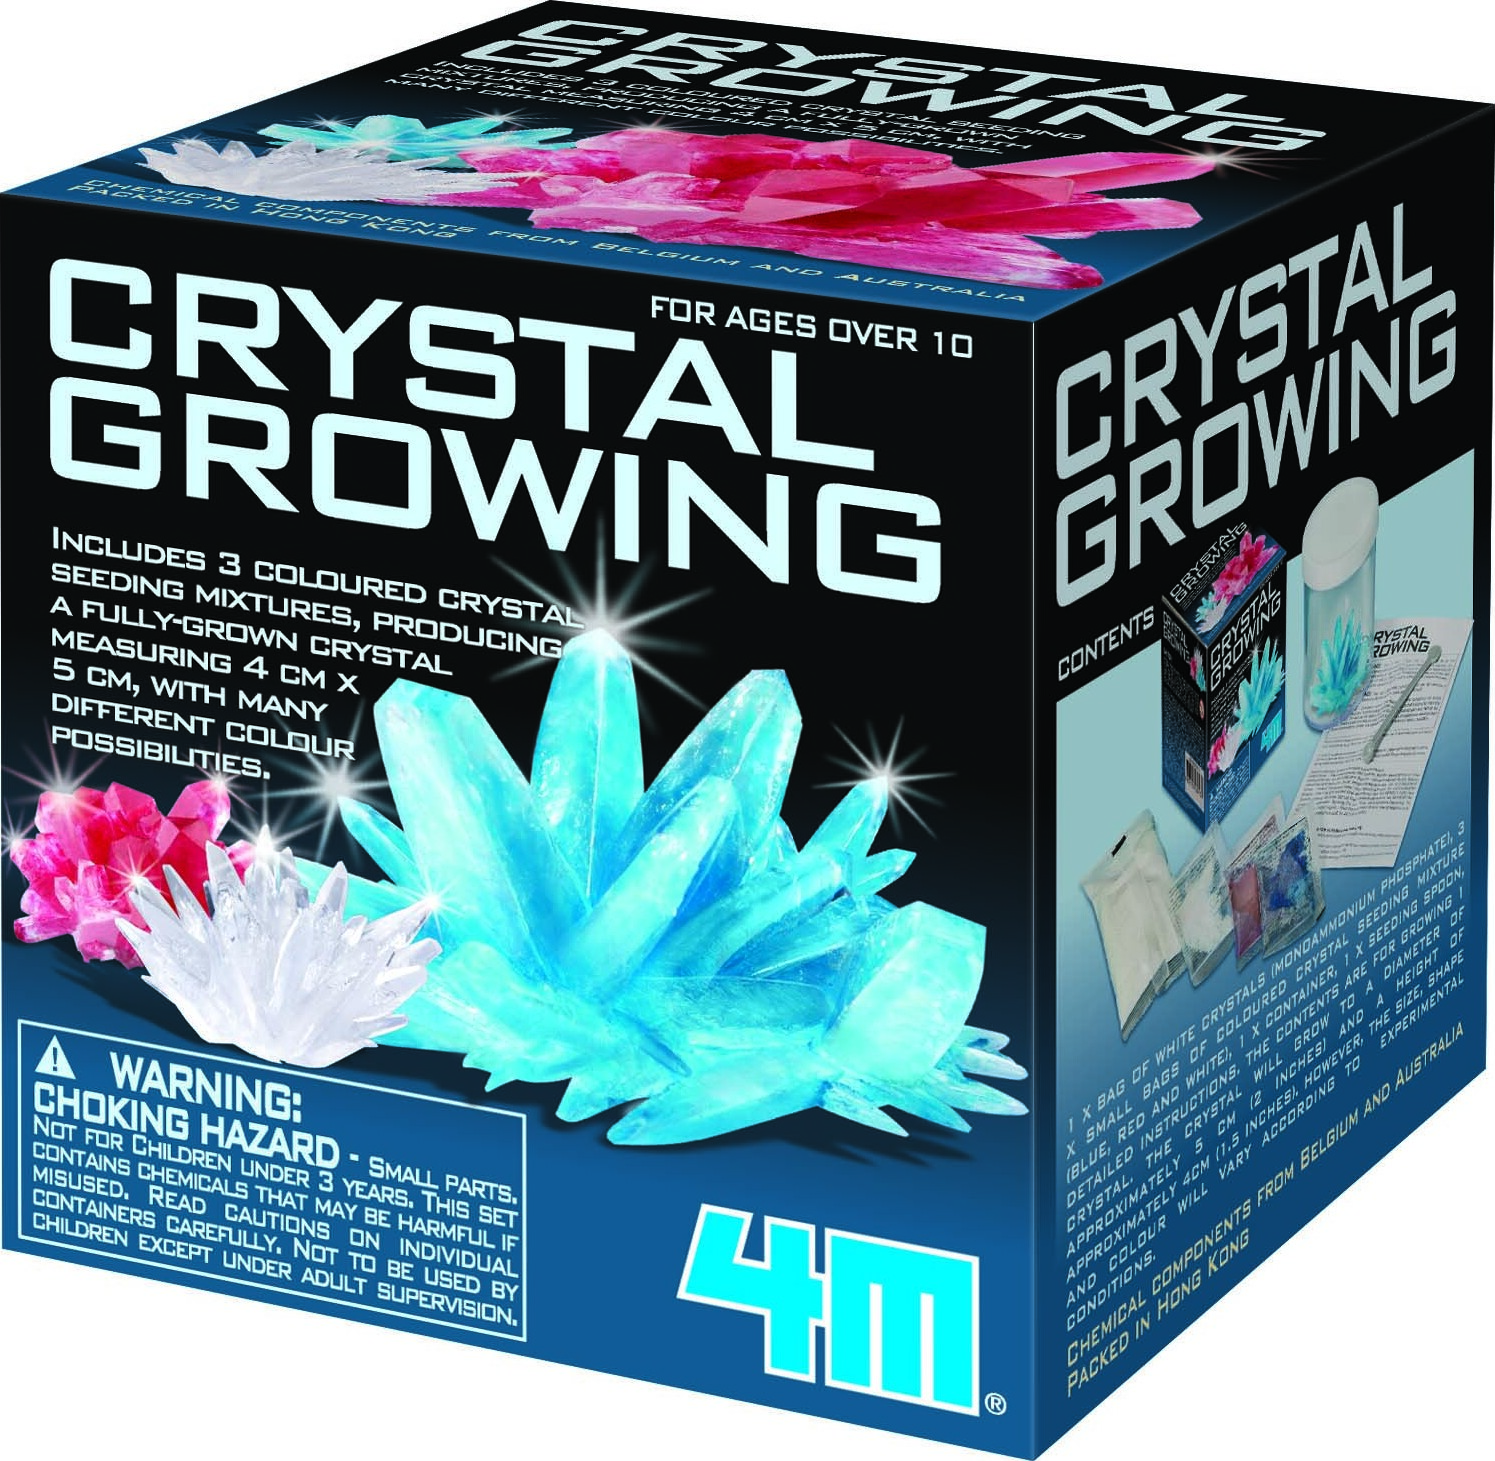 TOYSMITH 4627 CRYSTAL GROWING KIT colors red or white available 